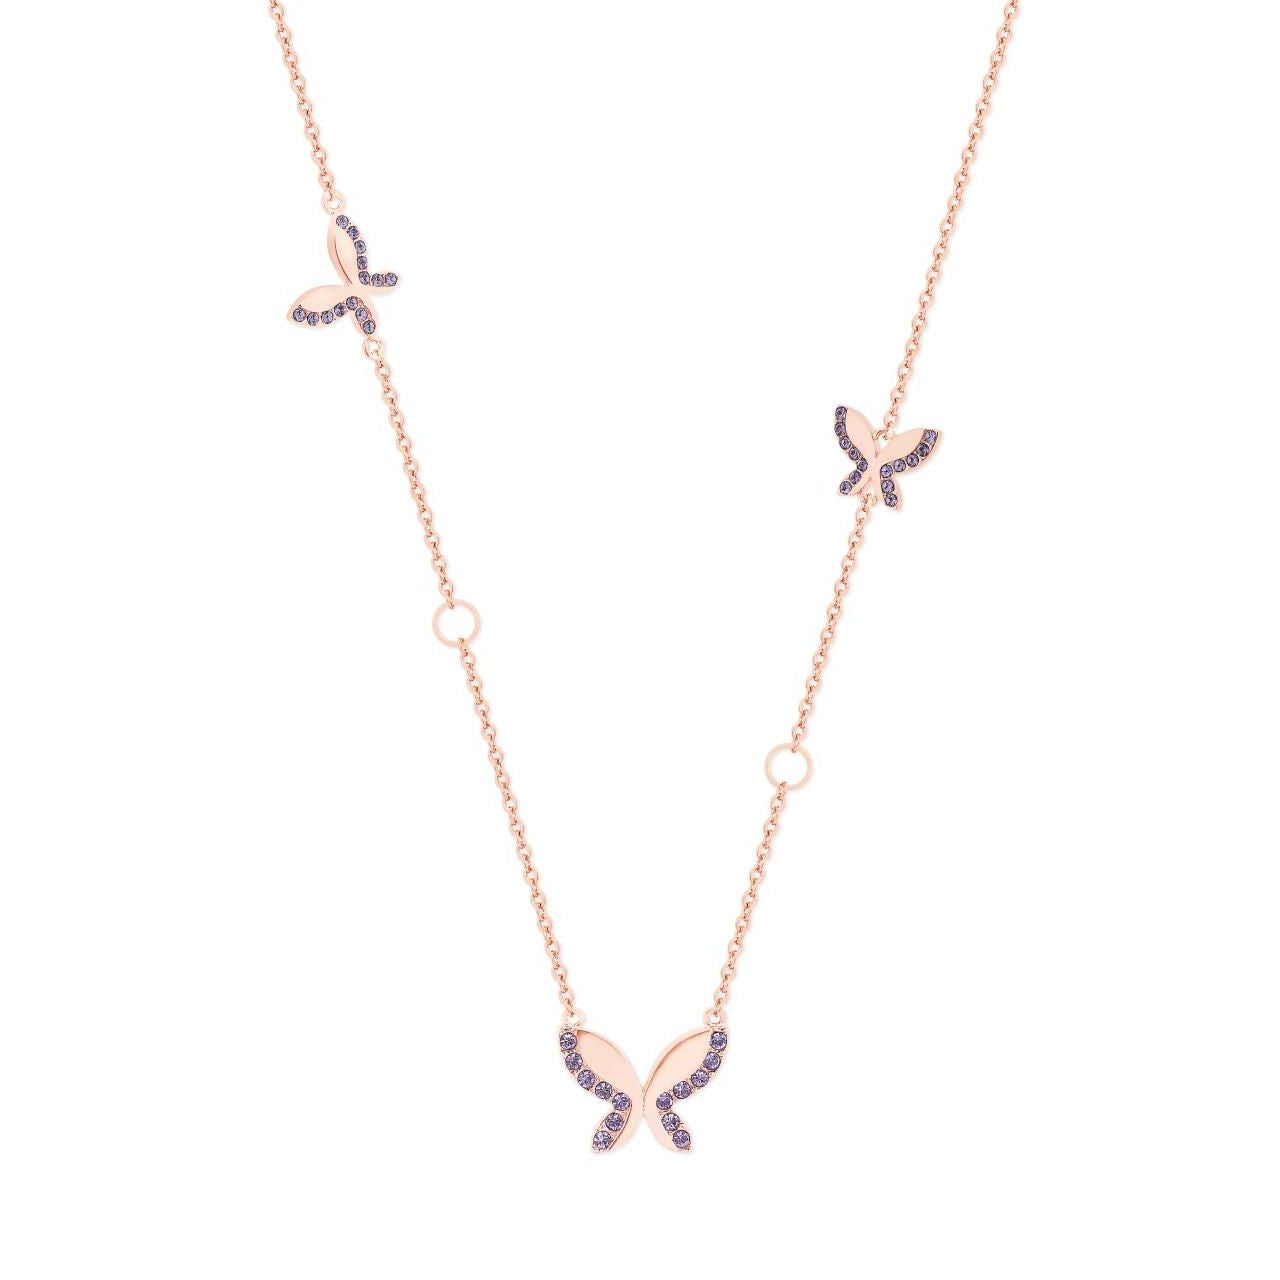 Tipperary Crystal Butterfly Rose Gold Necklace  Drawing inspiration from urban garden, the Tipperary Crystal Butterfly collection transforms an icon into something modern and unexpected. Playful and elegant, this collection draws from the inherent beauty of the butterfly. The butterfly appealed as a Jewellery theme to our designers who have dedicated a full jewellery collection to these delicate creatures.